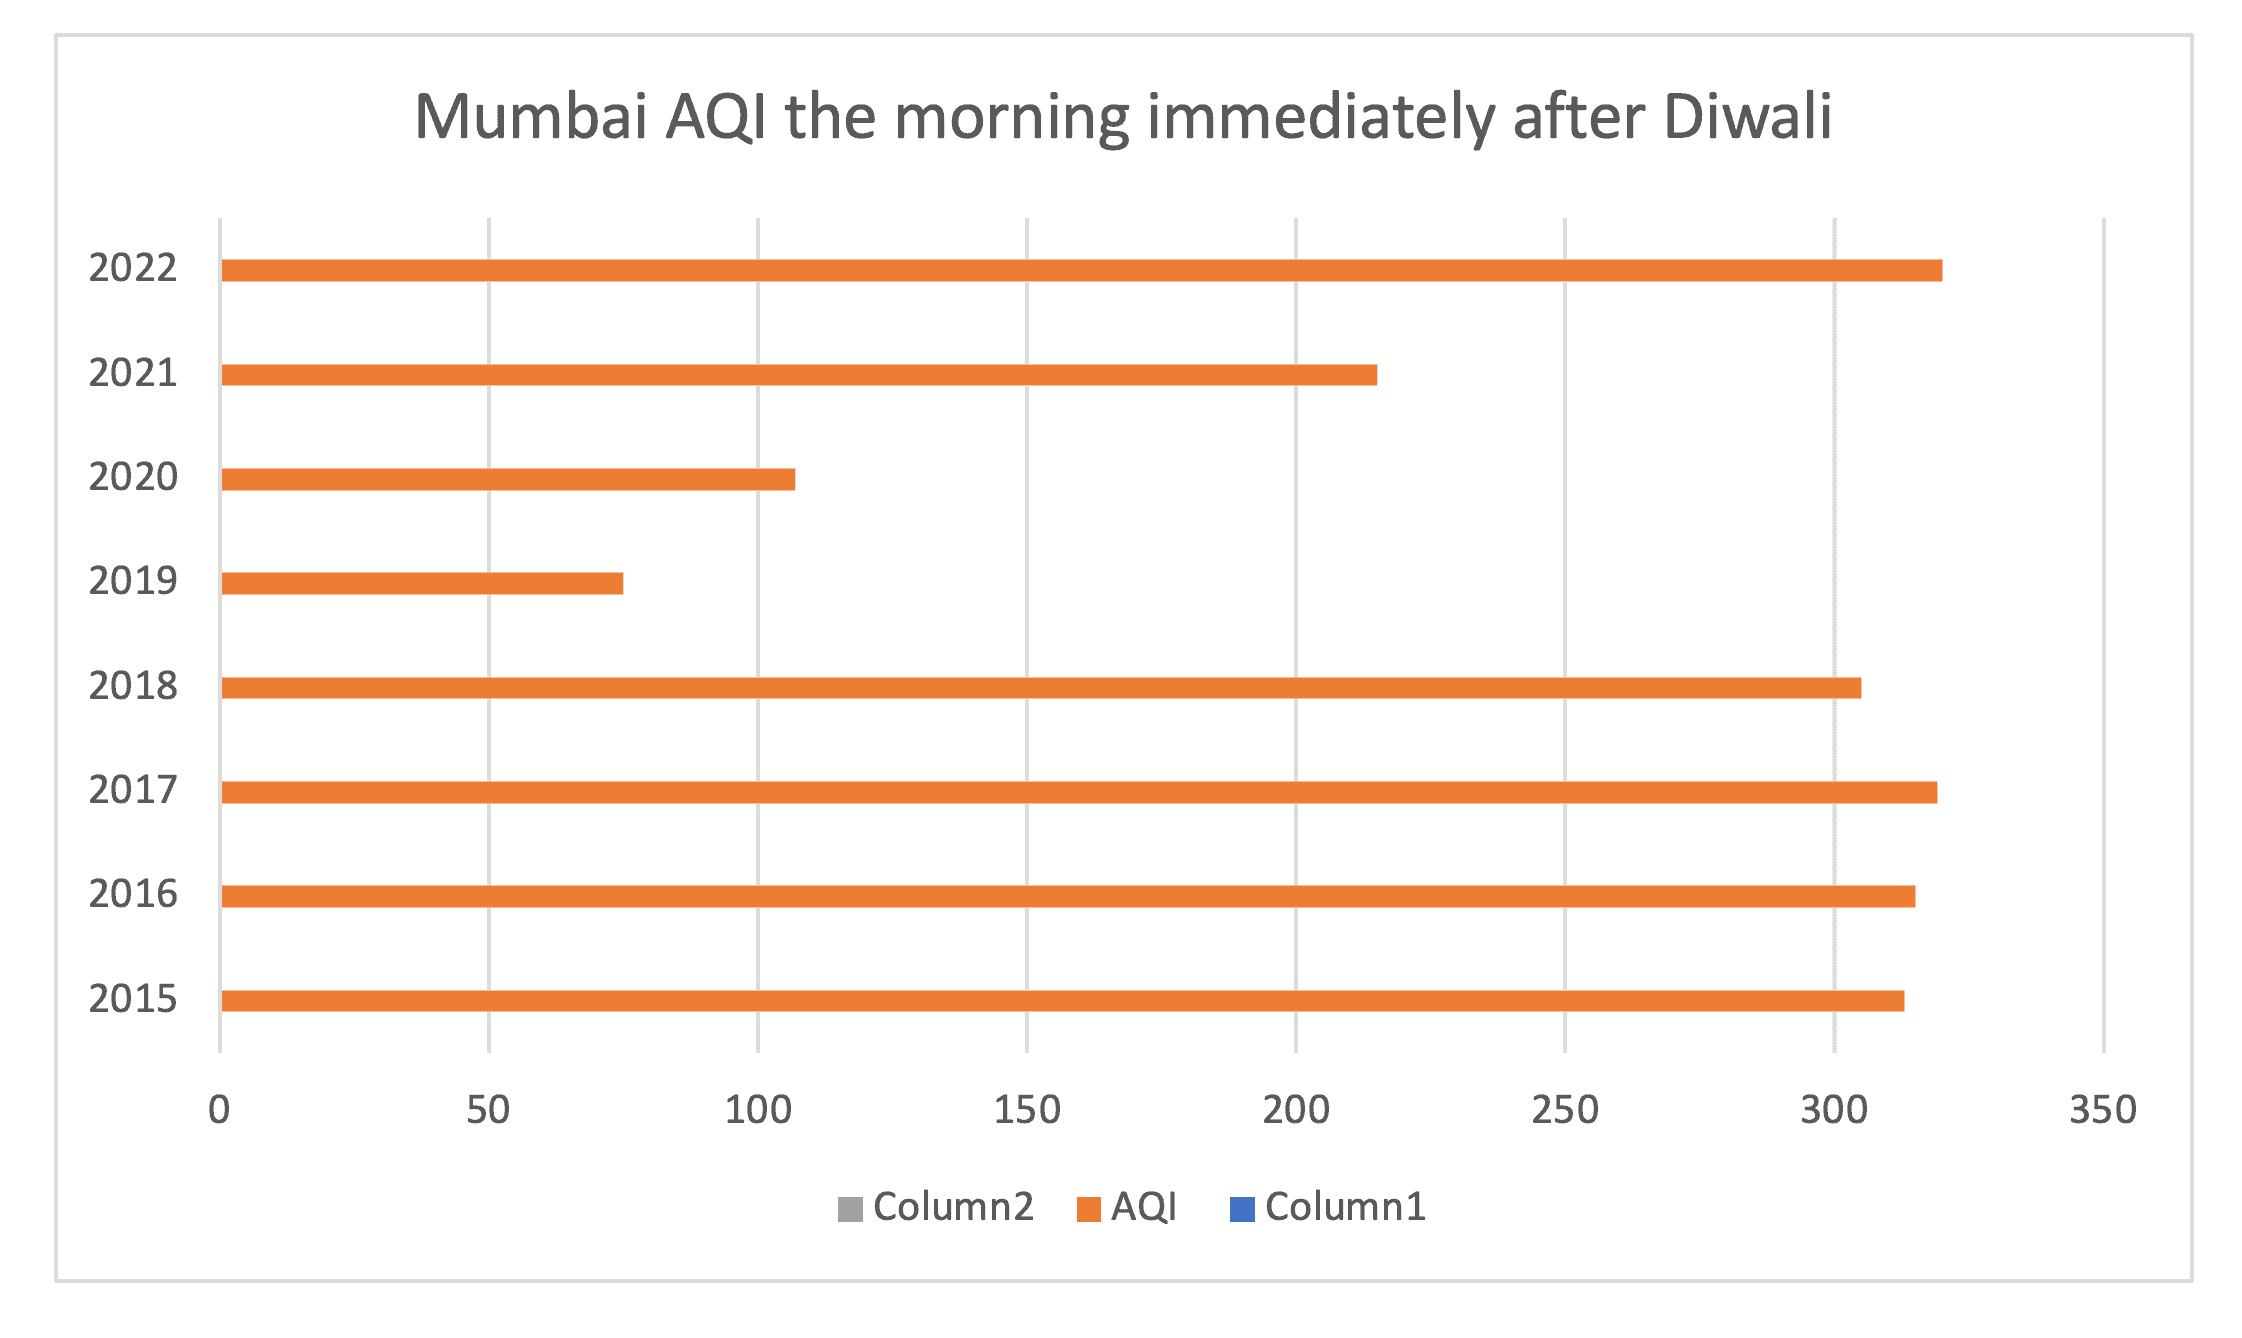 Mumbai’s air quality post-Diwali has consistently shown a decline in its quality.